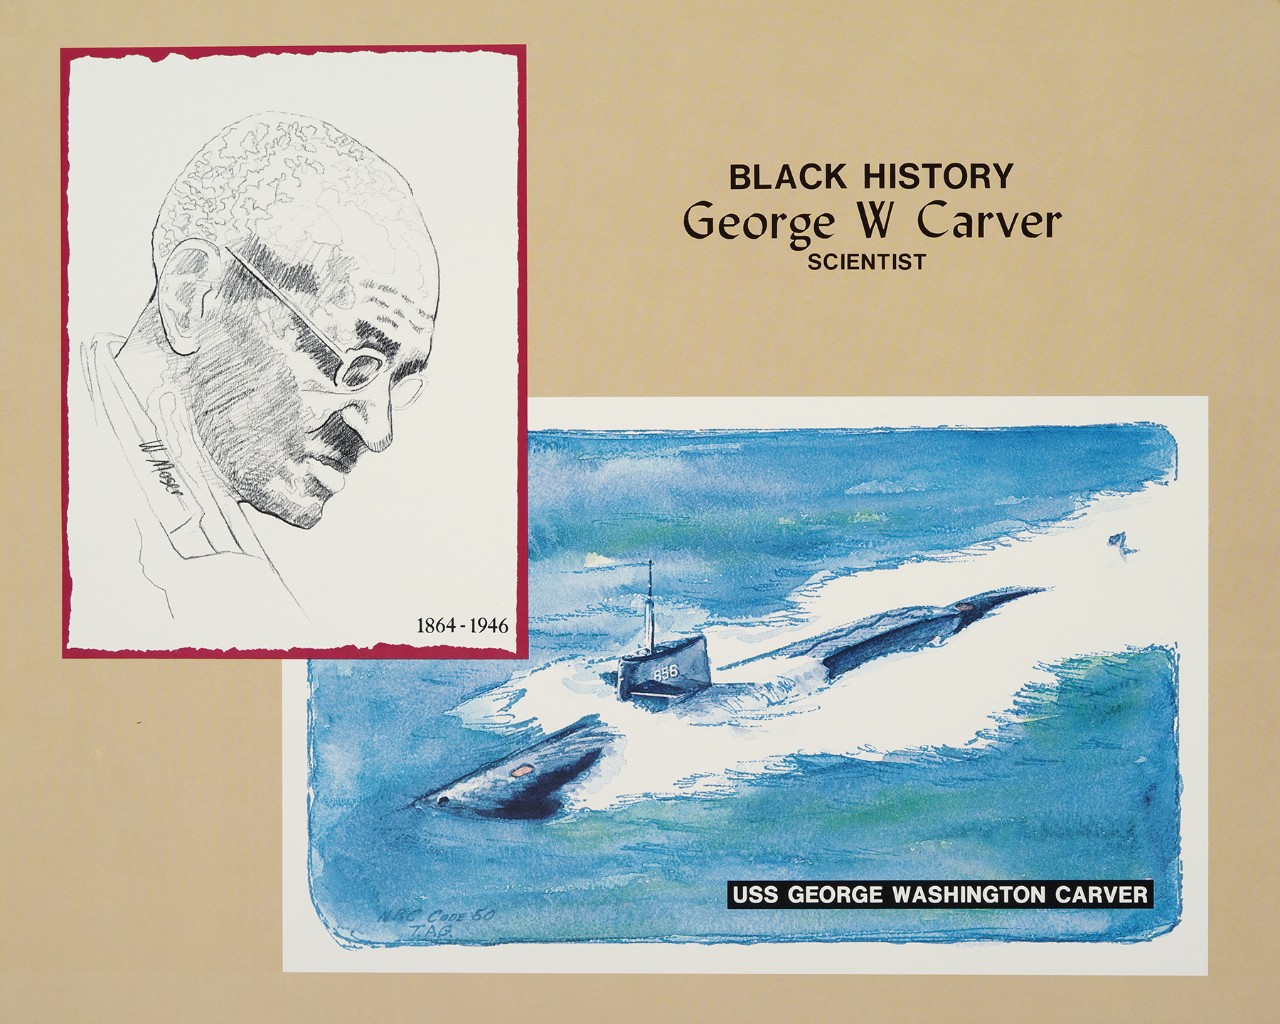 There are two images the top left a portrait of George Craver, the bottom right is the submarine USS George Washington Craver.